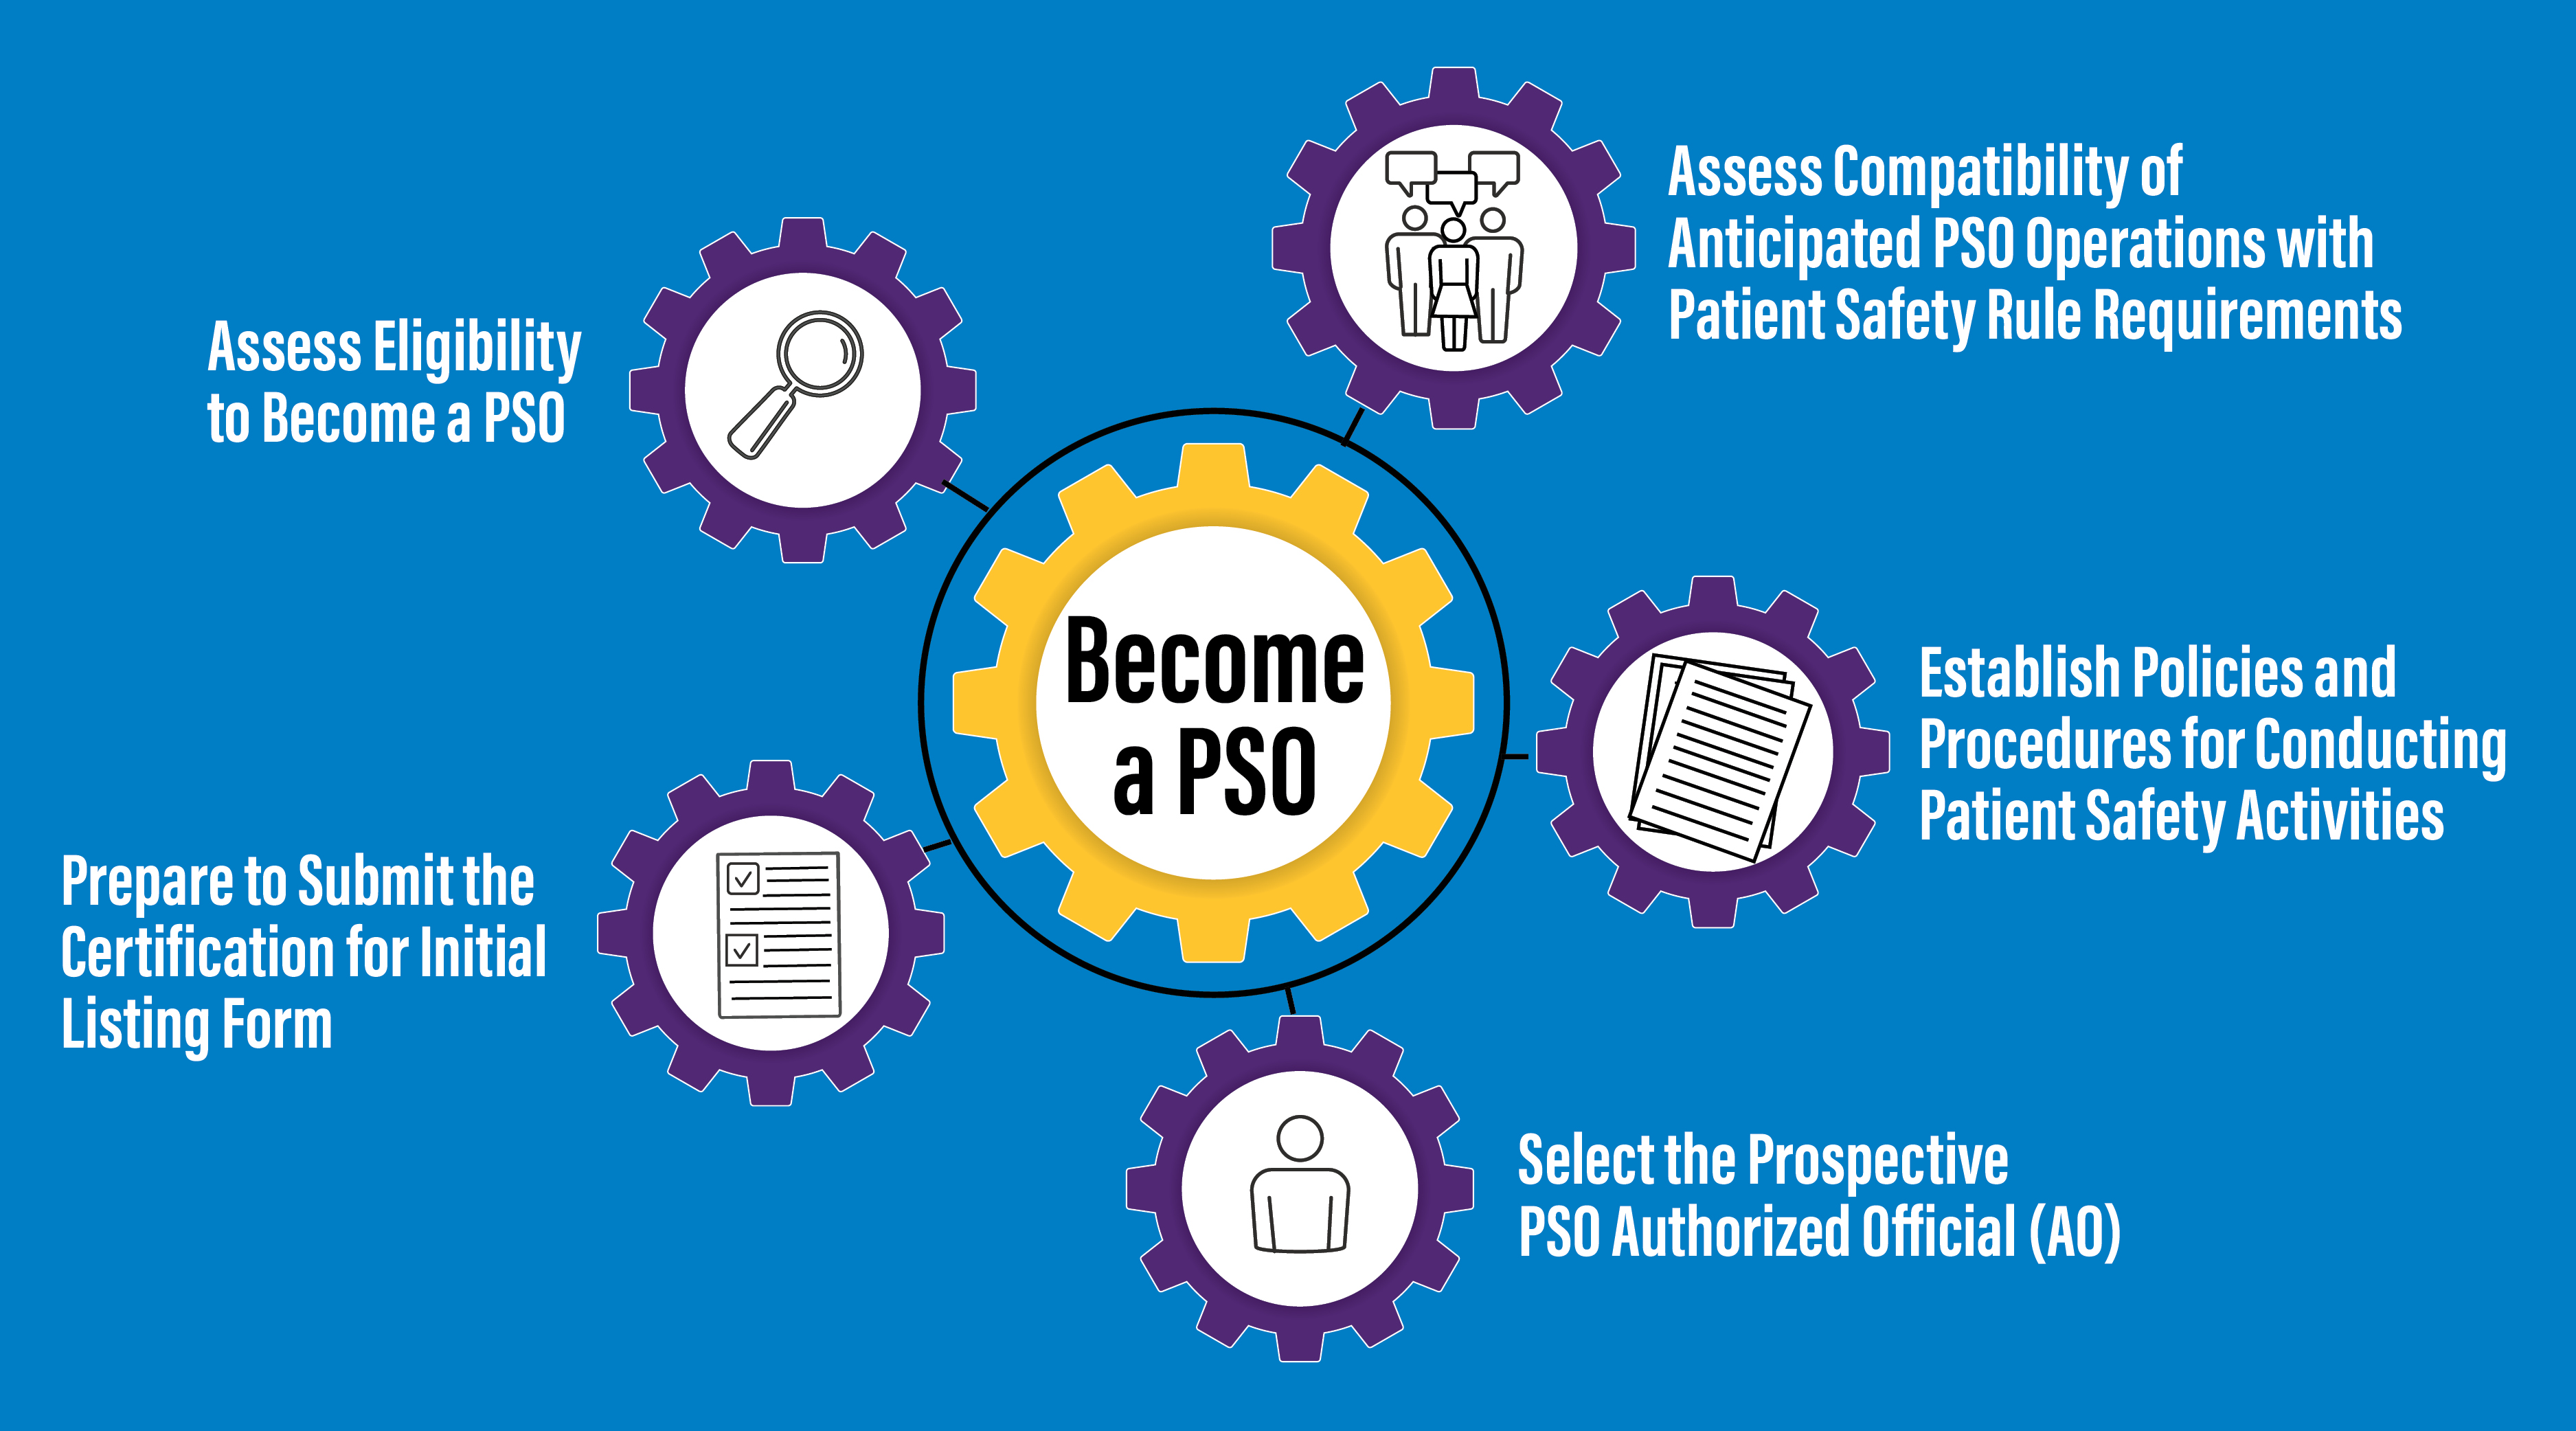 5 steps for becoming a PSO: evaluate eligibility, assess plans and requirements, prepare policies and procedures, choose authorized official, complete and submit form.